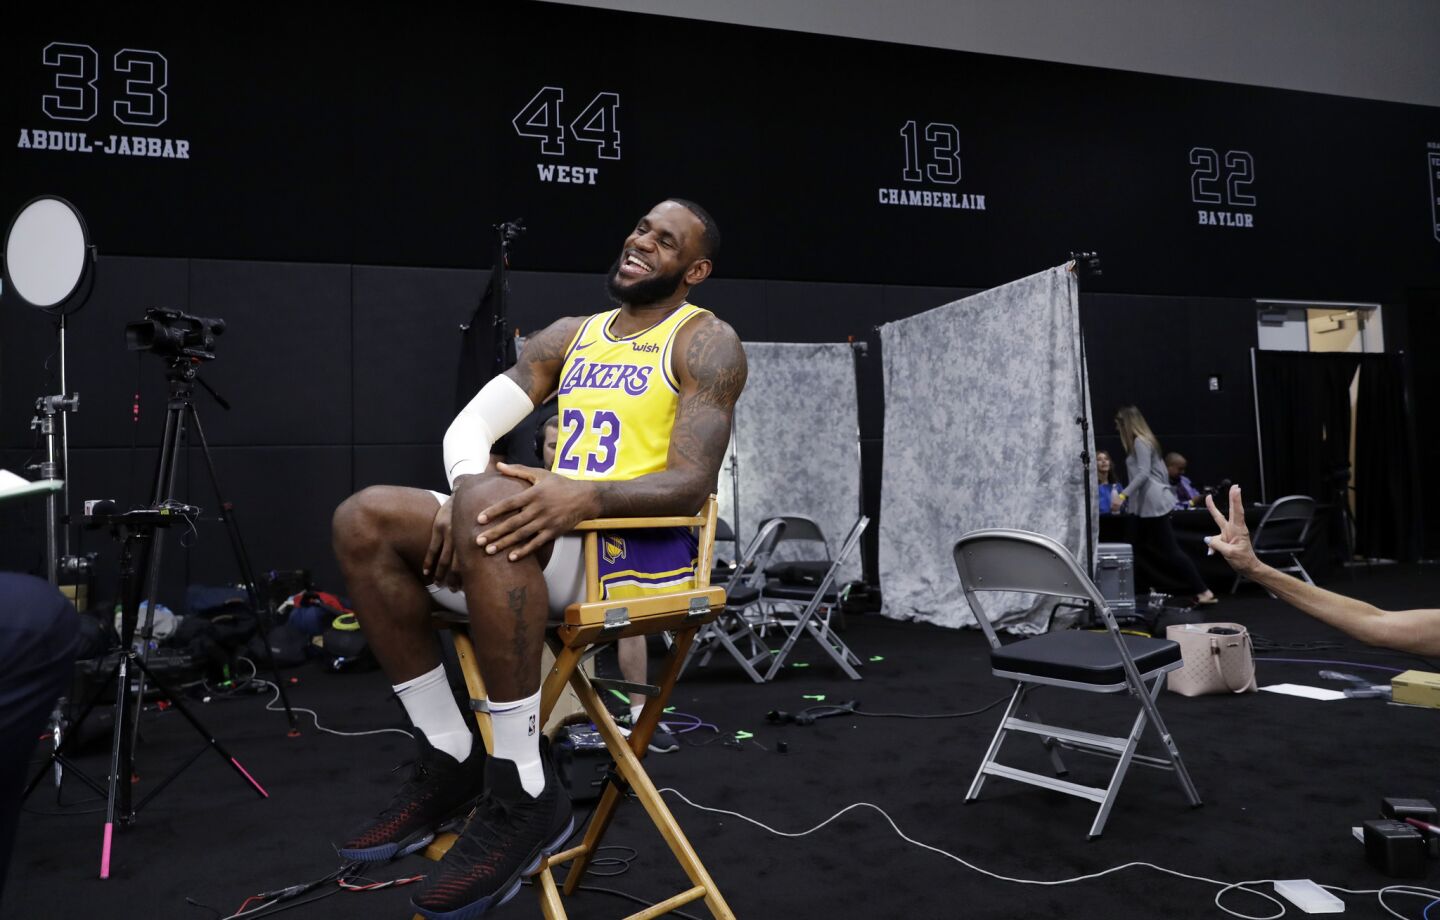 Los Angeles Lakers' LeBron James (23) smiles as he conducts an interview during media day at the NBA basketball team's practice facility Monday, Sept. 24, 2018, in El Segundo, Calif. (AP Photo/Marcio Jose Sanchez)